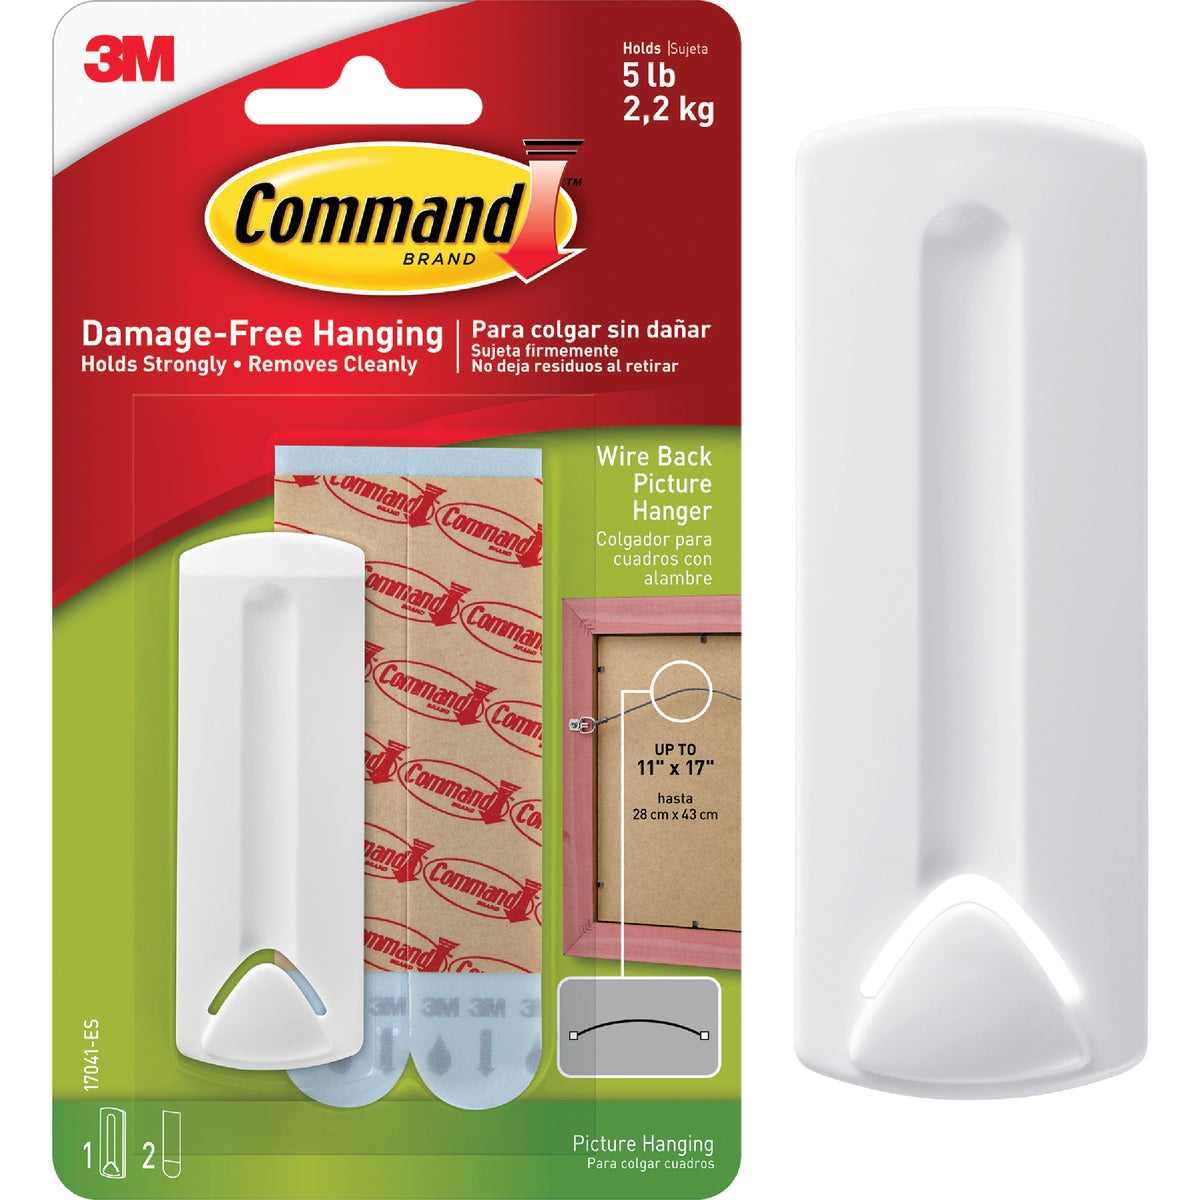 Item 601815, Command Picture Hangers, Hooks and Clips make decorating quick and easy.